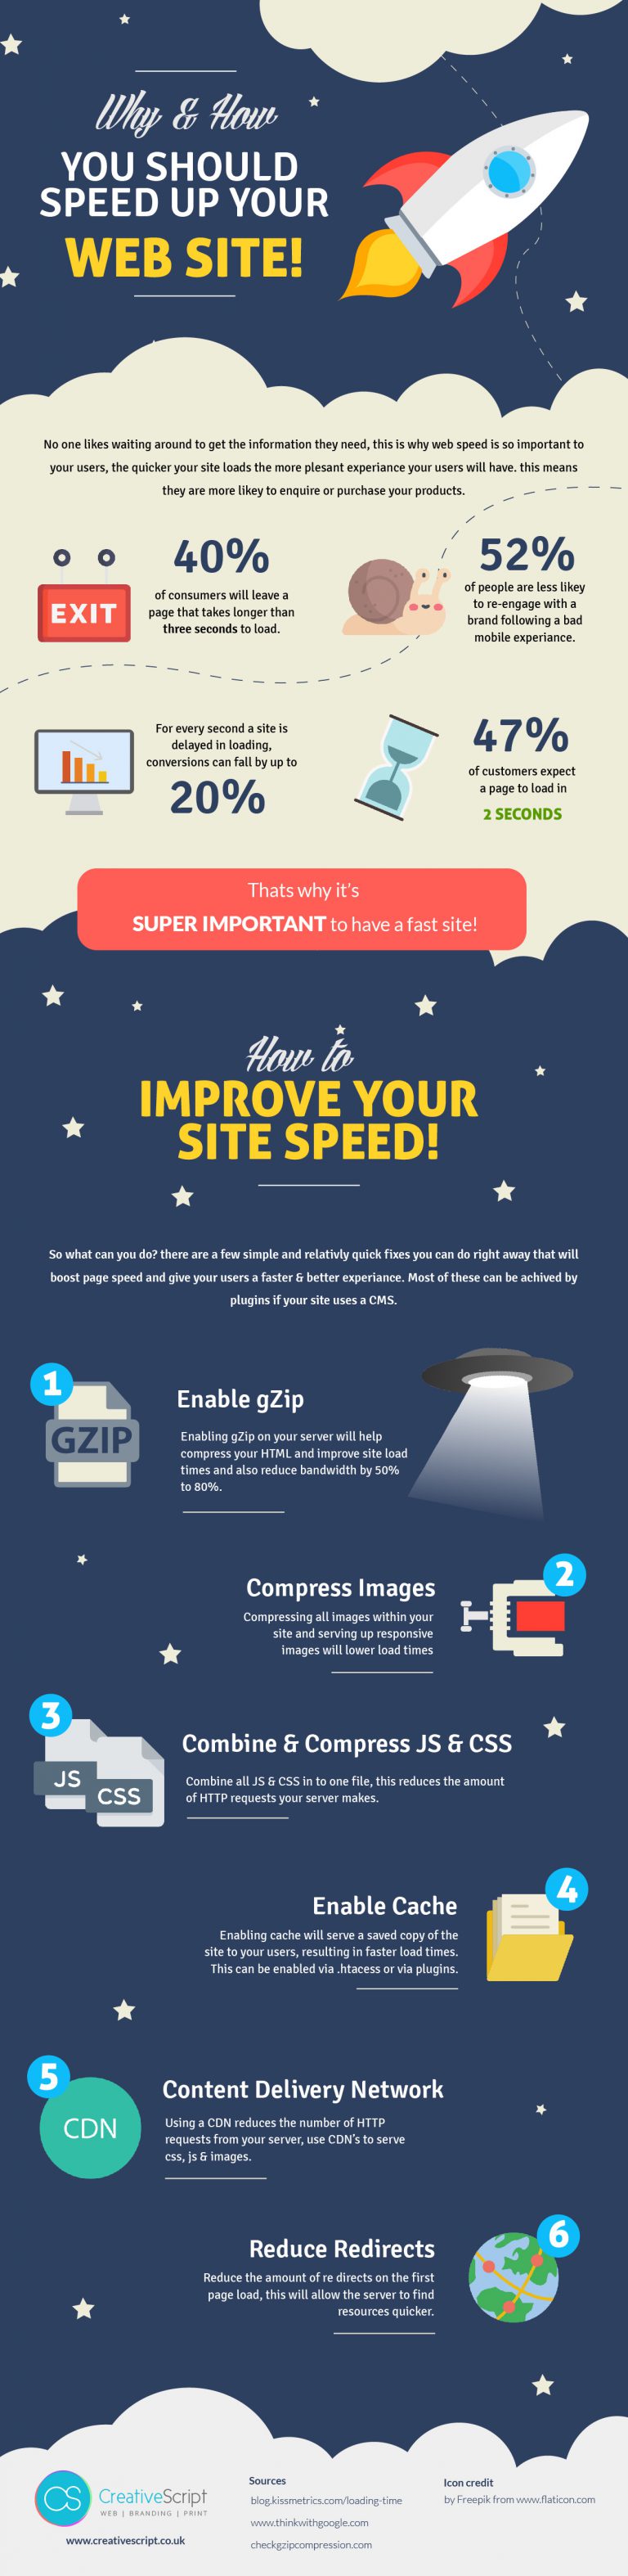 Infographic: How to Speed up your site